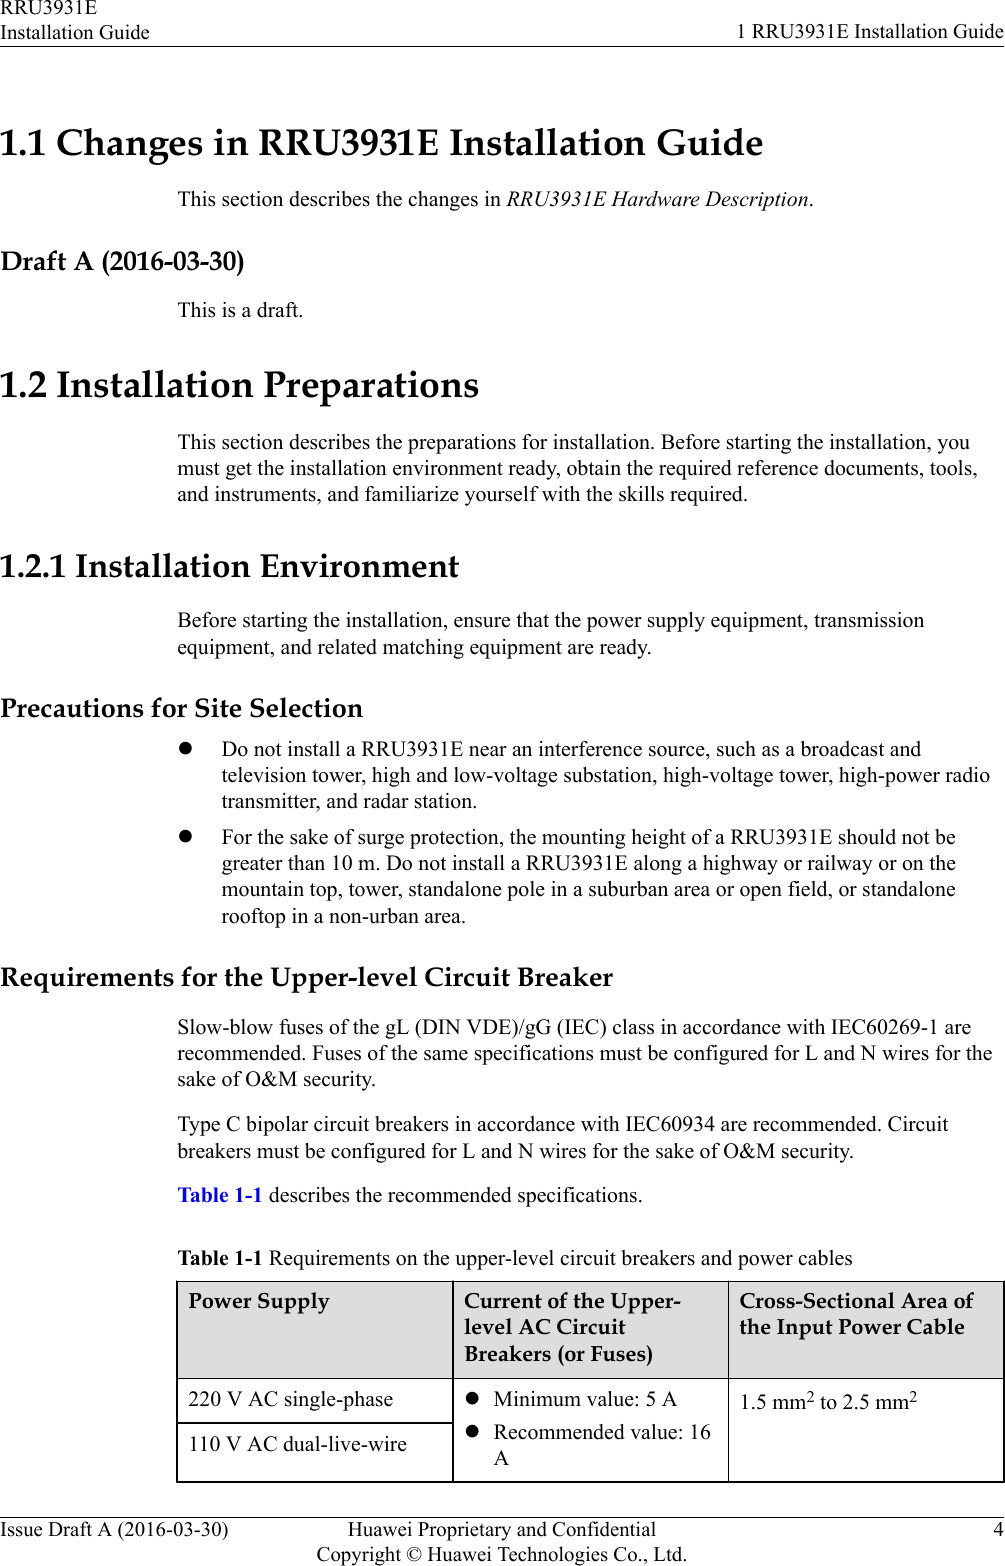 1.1 Changes in RRU3931E Installation GuideThis section describes the changes in RRU3931E Hardware Description.Draft A (2016-03-30)This is a draft.1.2 Installation PreparationsThis section describes the preparations for installation. Before starting the installation, youmust get the installation environment ready, obtain the required reference documents, tools,and instruments, and familiarize yourself with the skills required.1.2.1 Installation EnvironmentBefore starting the installation, ensure that the power supply equipment, transmissionequipment, and related matching equipment are ready.Precautions for Site SelectionlDo not install a RRU3931E near an interference source, such as a broadcast andtelevision tower, high and low-voltage substation, high-voltage tower, high-power radiotransmitter, and radar station.lFor the sake of surge protection, the mounting height of a RRU3931E should not begreater than 10 m. Do not install a RRU3931E along a highway or railway or on themountain top, tower, standalone pole in a suburban area or open field, or standalonerooftop in a non-urban area.Requirements for the Upper-level Circuit BreakerSlow-blow fuses of the gL (DIN VDE)/gG (IEC) class in accordance with IEC60269-1 arerecommended. Fuses of the same specifications must be configured for L and N wires for thesake of O&amp;M security.Type C bipolar circuit breakers in accordance with IEC60934 are recommended. Circuitbreakers must be configured for L and N wires for the sake of O&amp;M security.Table 1-1 describes the recommended specifications.Table 1-1 Requirements on the upper-level circuit breakers and power cablesPower Supply Current of the Upper-level AC CircuitBreakers (or Fuses)Cross-Sectional Area ofthe Input Power Cable220 V AC single-phase lMinimum value: 5 AlRecommended value: 16A1.5 mm2 to 2.5 mm2110 V AC dual-live-wireRRU3931EInstallation Guide 1 RRU3931E Installation GuideIssue Draft A (2016-03-30) Huawei Proprietary and ConfidentialCopyright © Huawei Technologies Co., Ltd.4